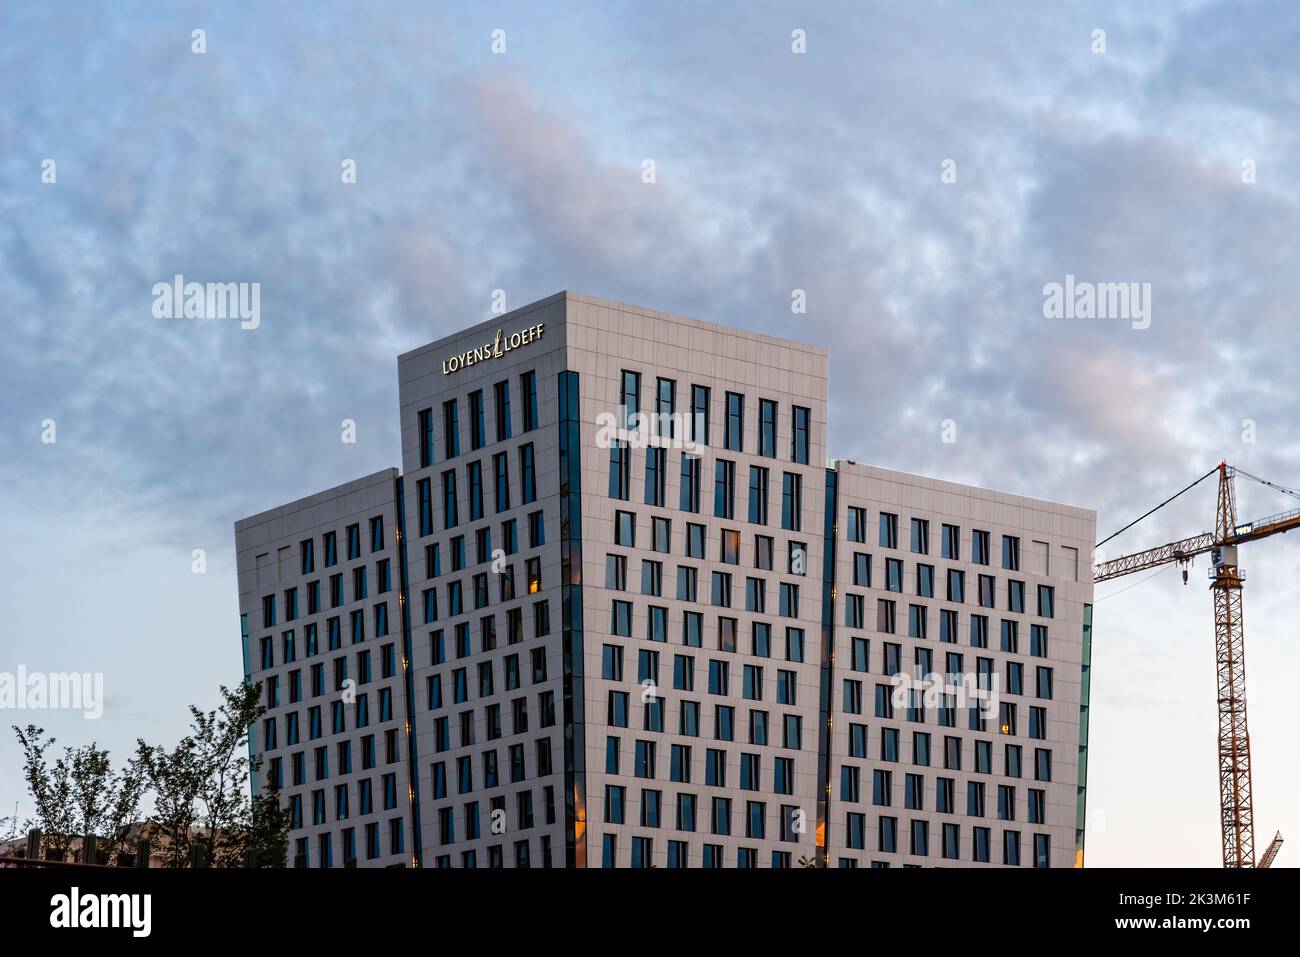 Amsterdam, Netherlands - May 7, 2022: Low angle view of futuristic architecture skyscraper against sky. Loyens and Loeff lawyer and legal services fir Stock Photo